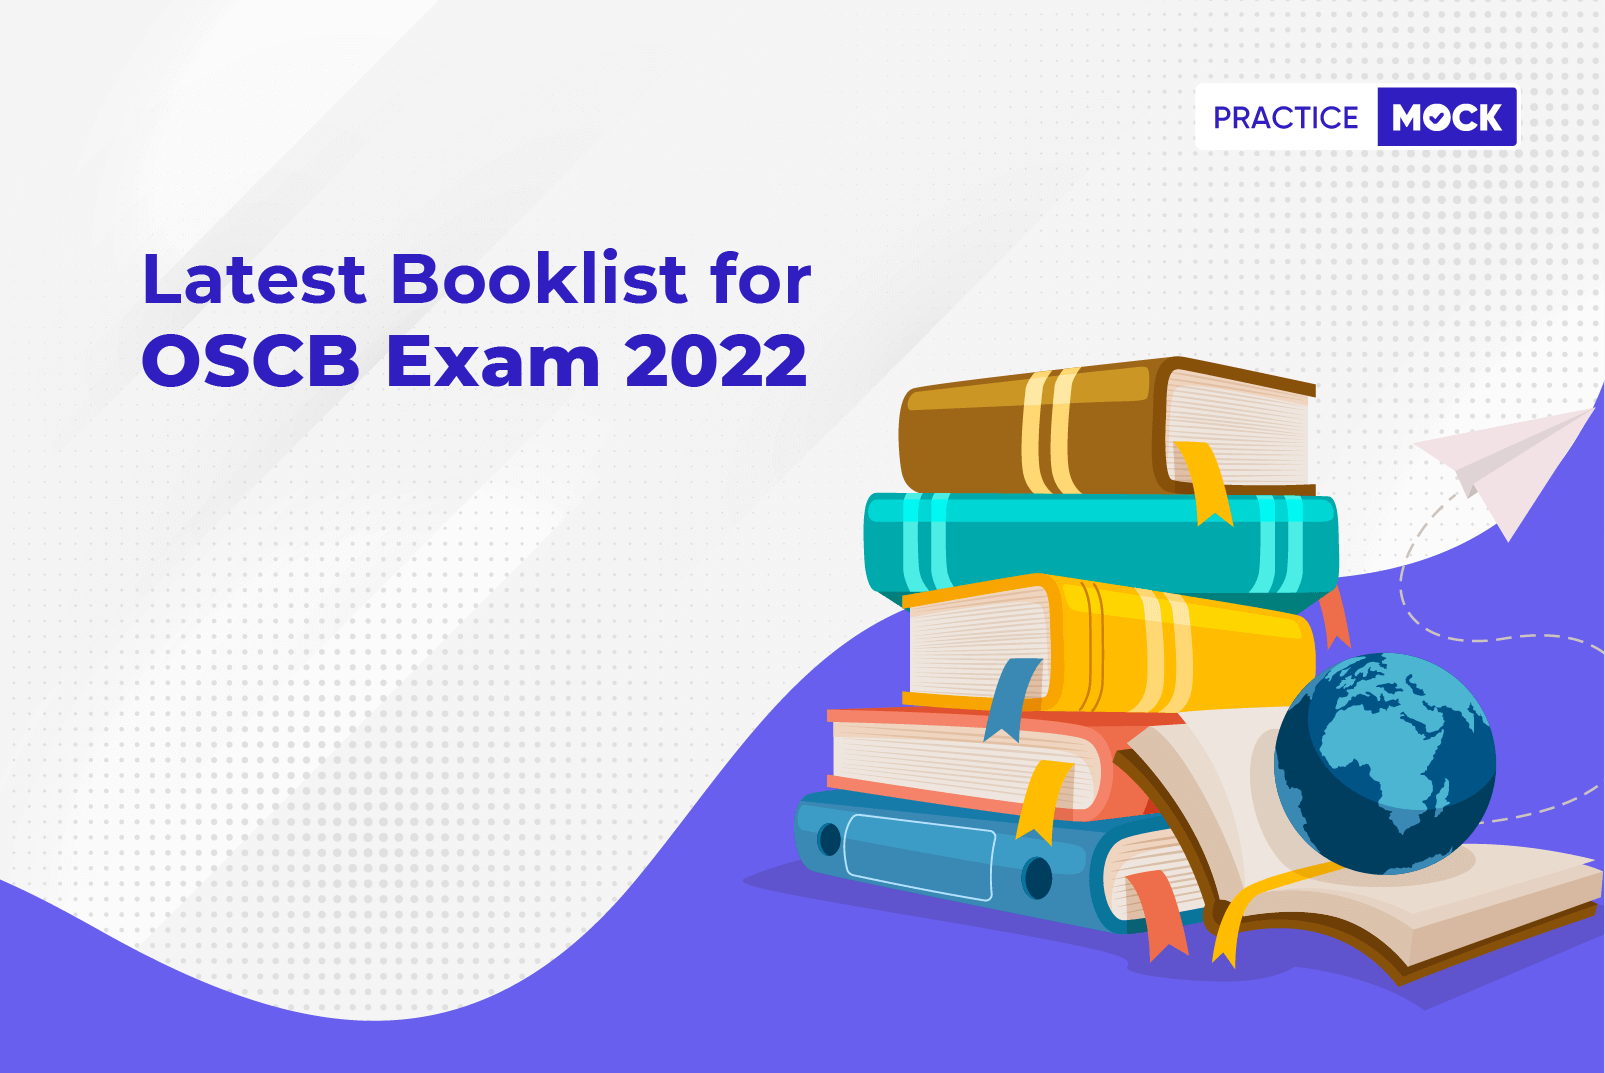 Best Section-wise Books for OSCB 2022 Exam